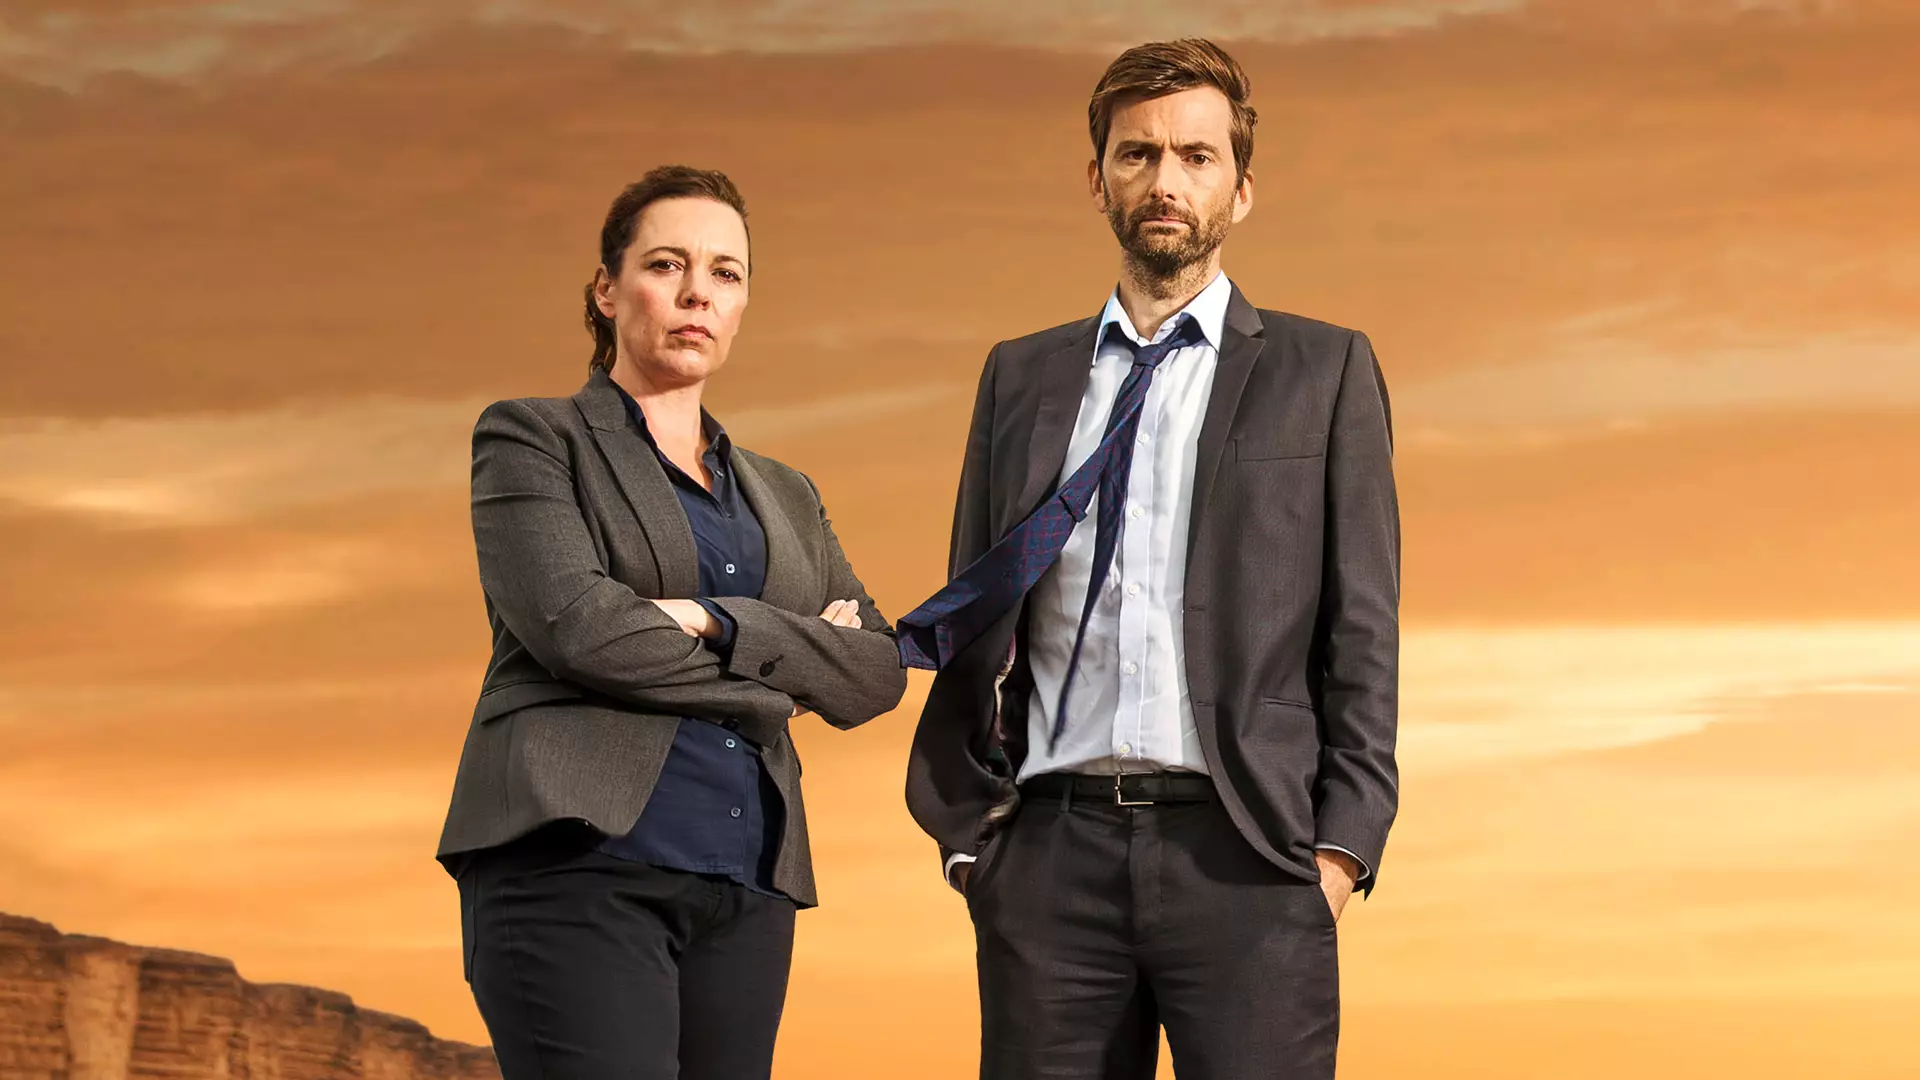 Broadchurch is also available on Britbox (